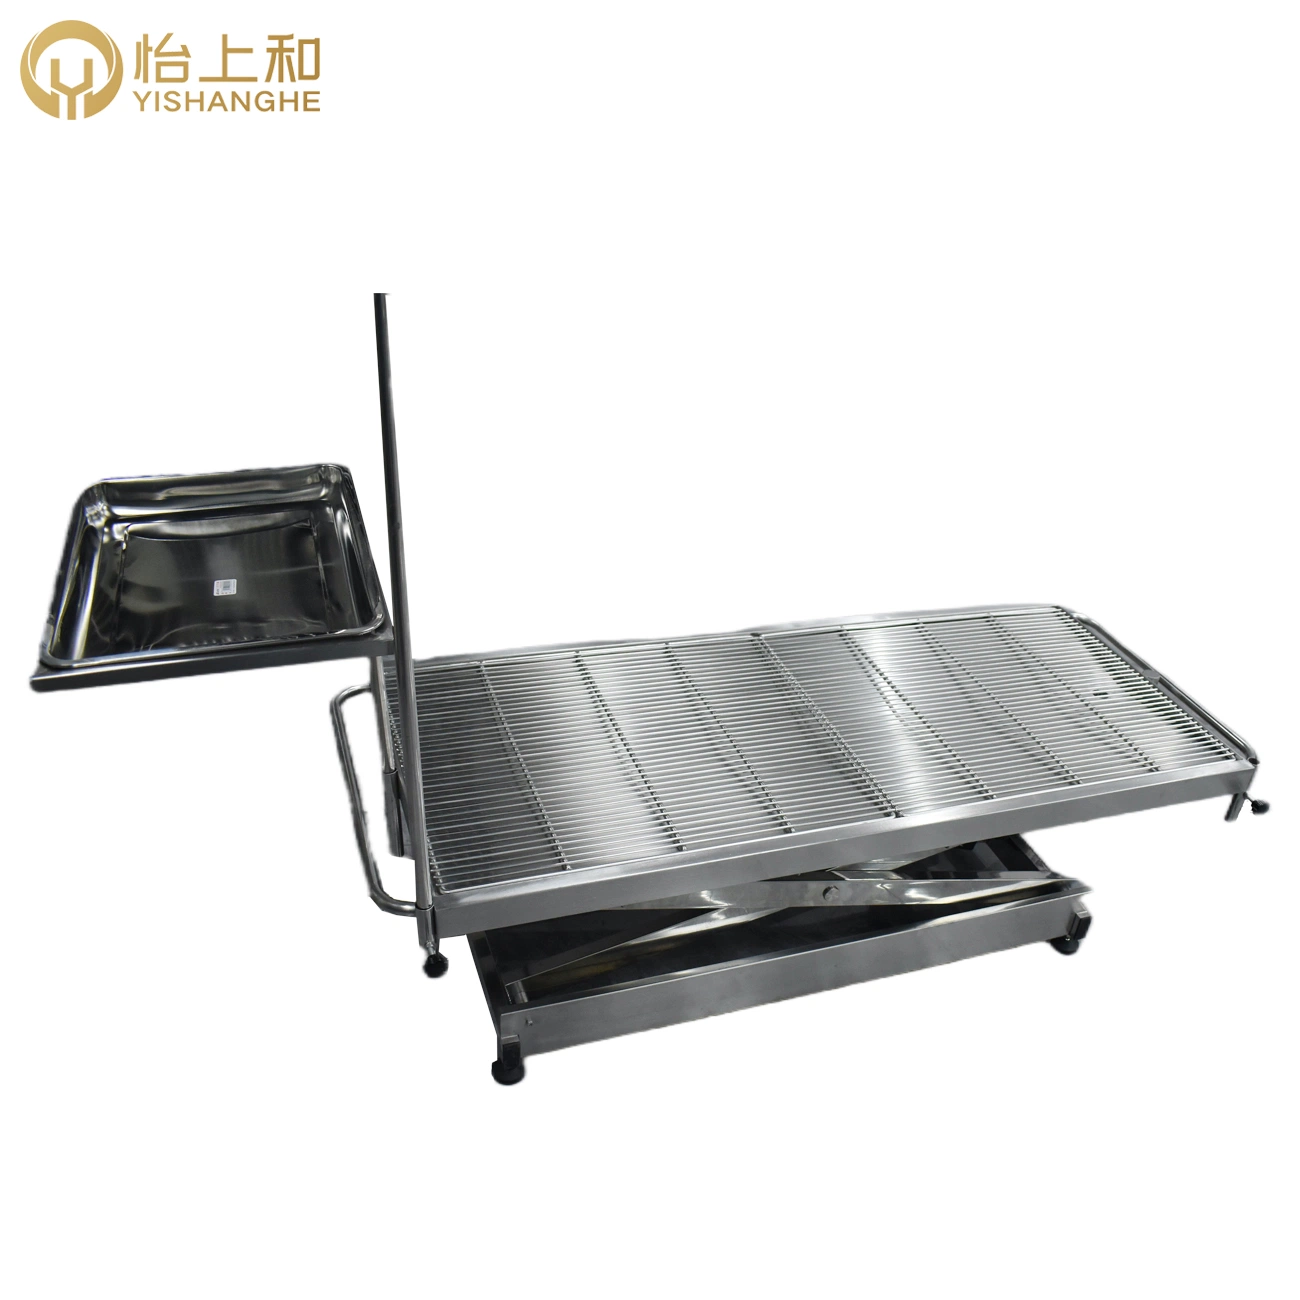 Veterinary Medical Surgery Animal Electric Stainless Steel Hospital Treatment Desk